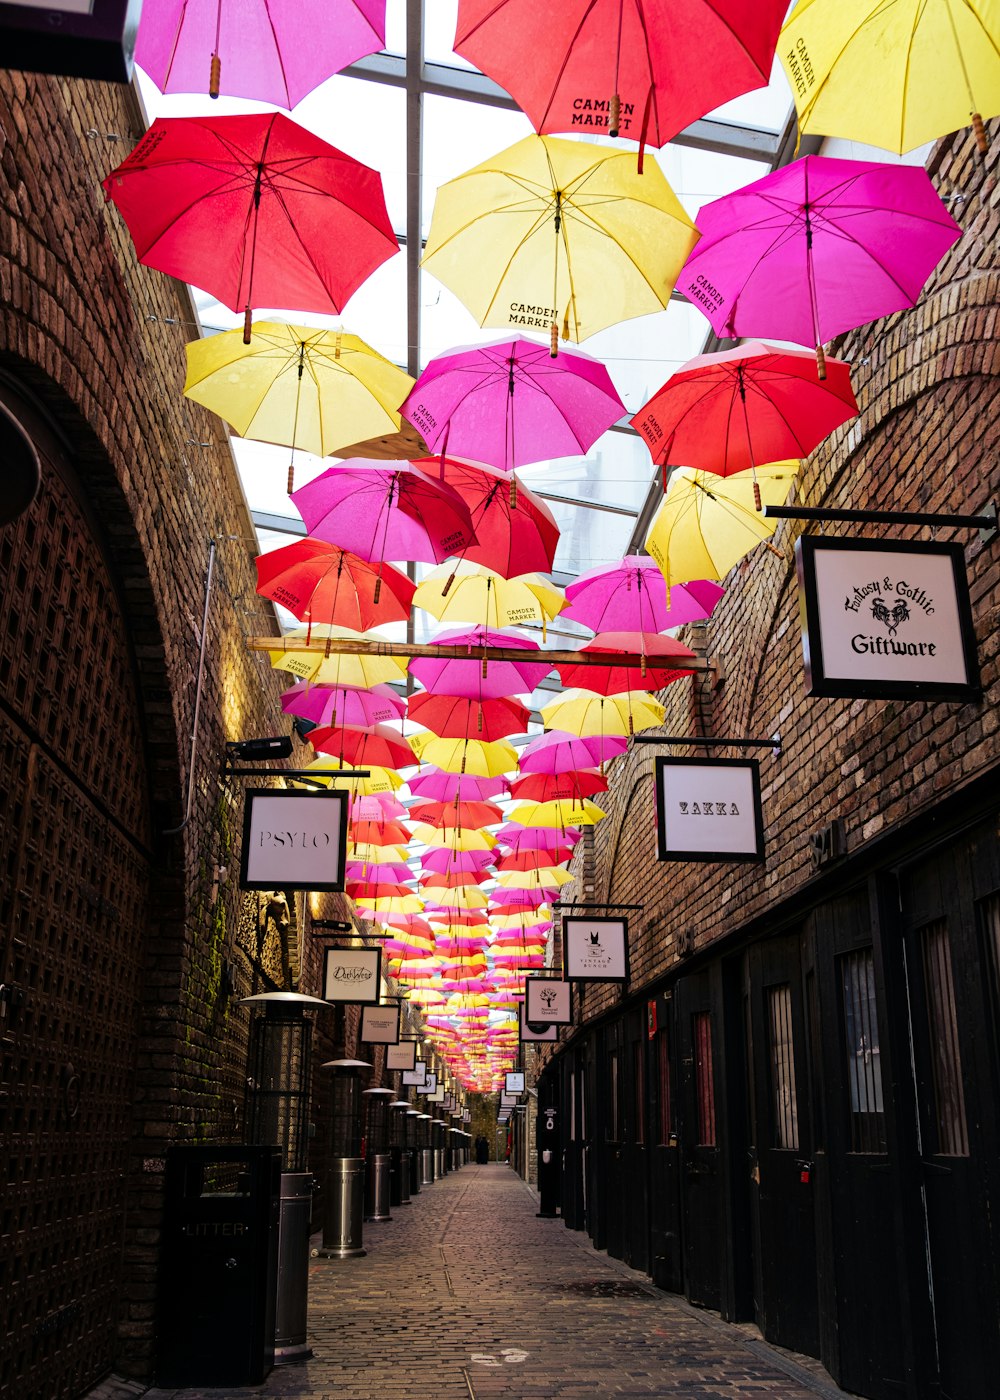 assorted umbrellas hanging on brown brick wall